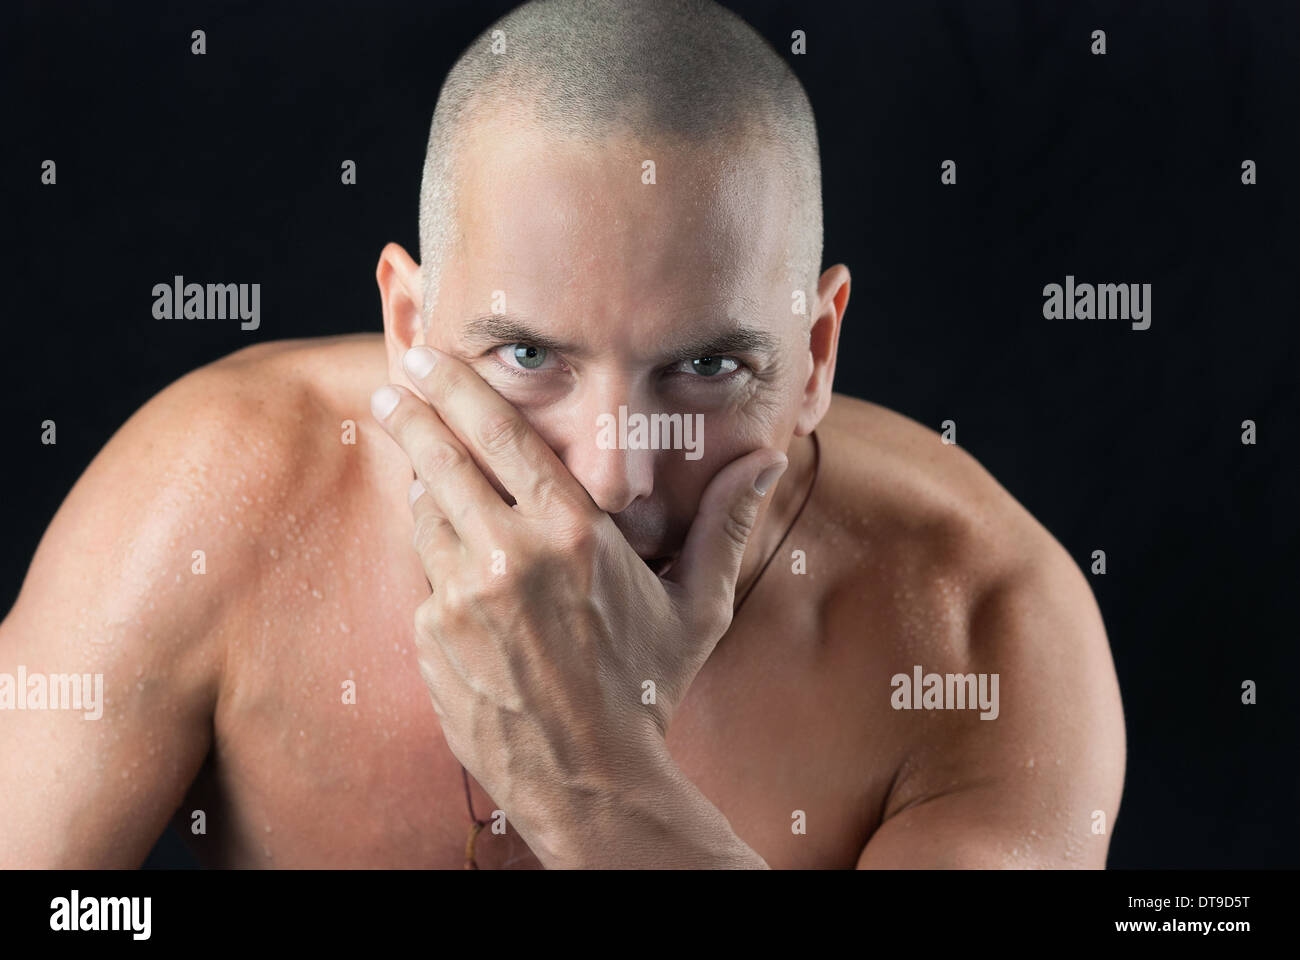 Confident man looking to camera, shiirtless, shaved head Stock Photo